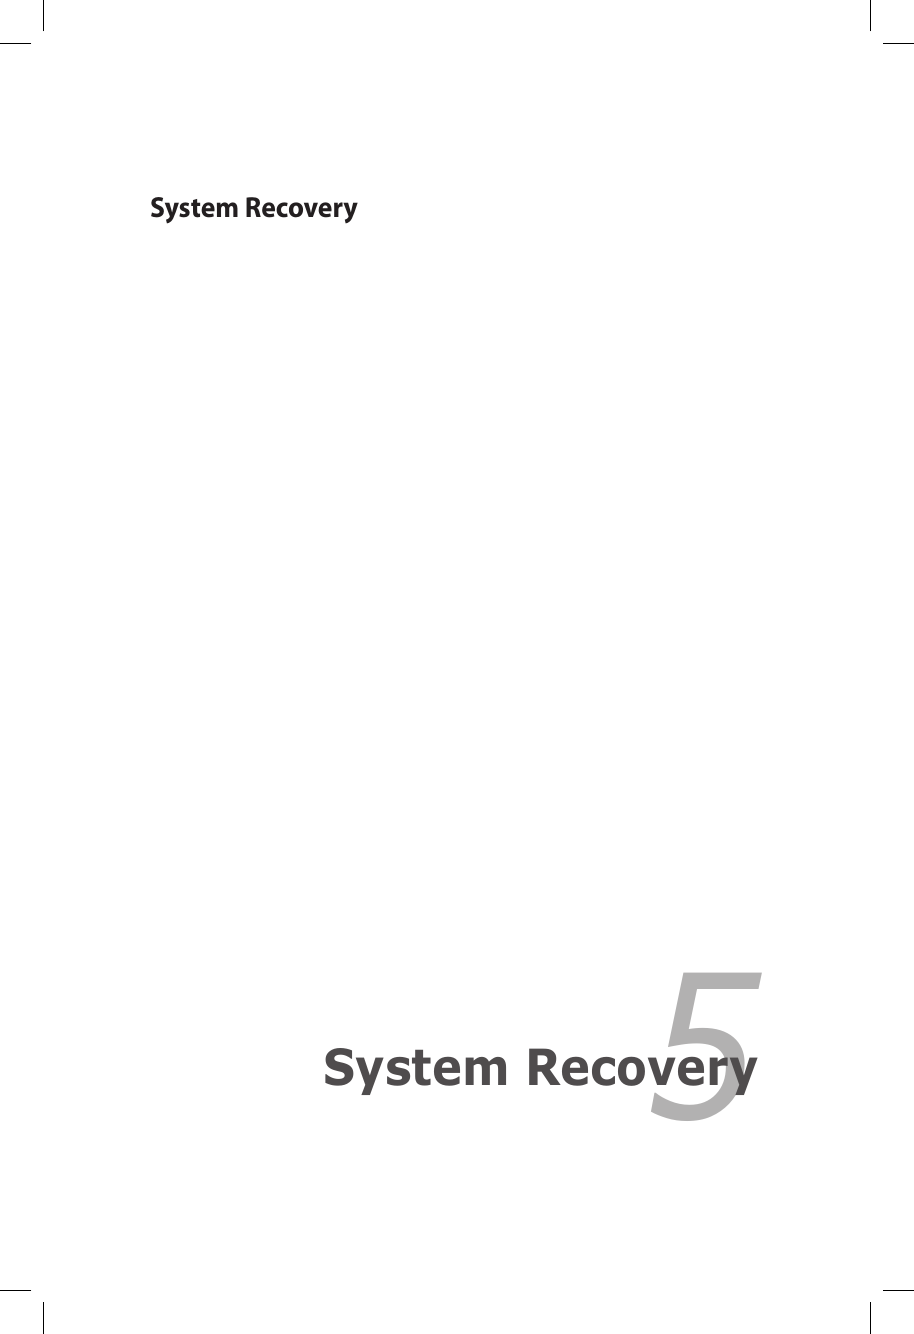 System Recovery5System Recovery